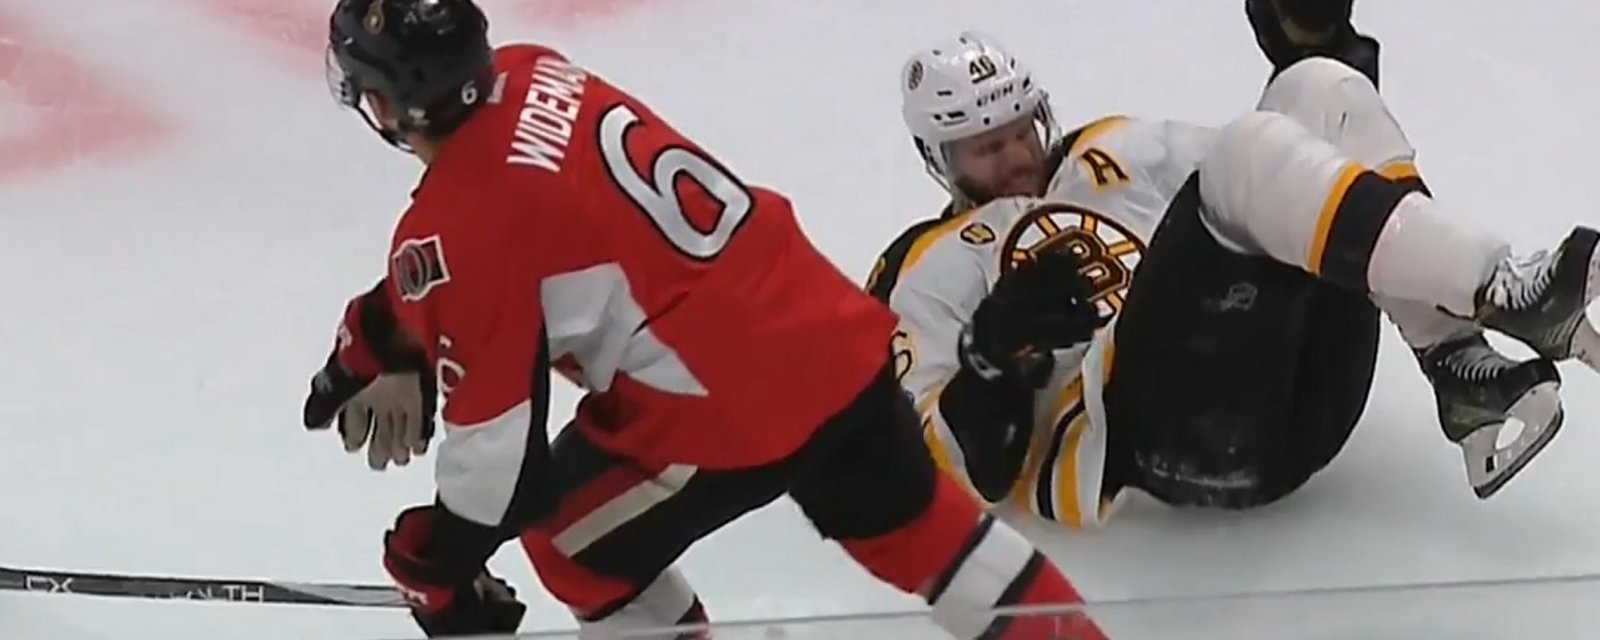 Breaking: Boston loses one of their top forwards after blatant knee on knee hit.